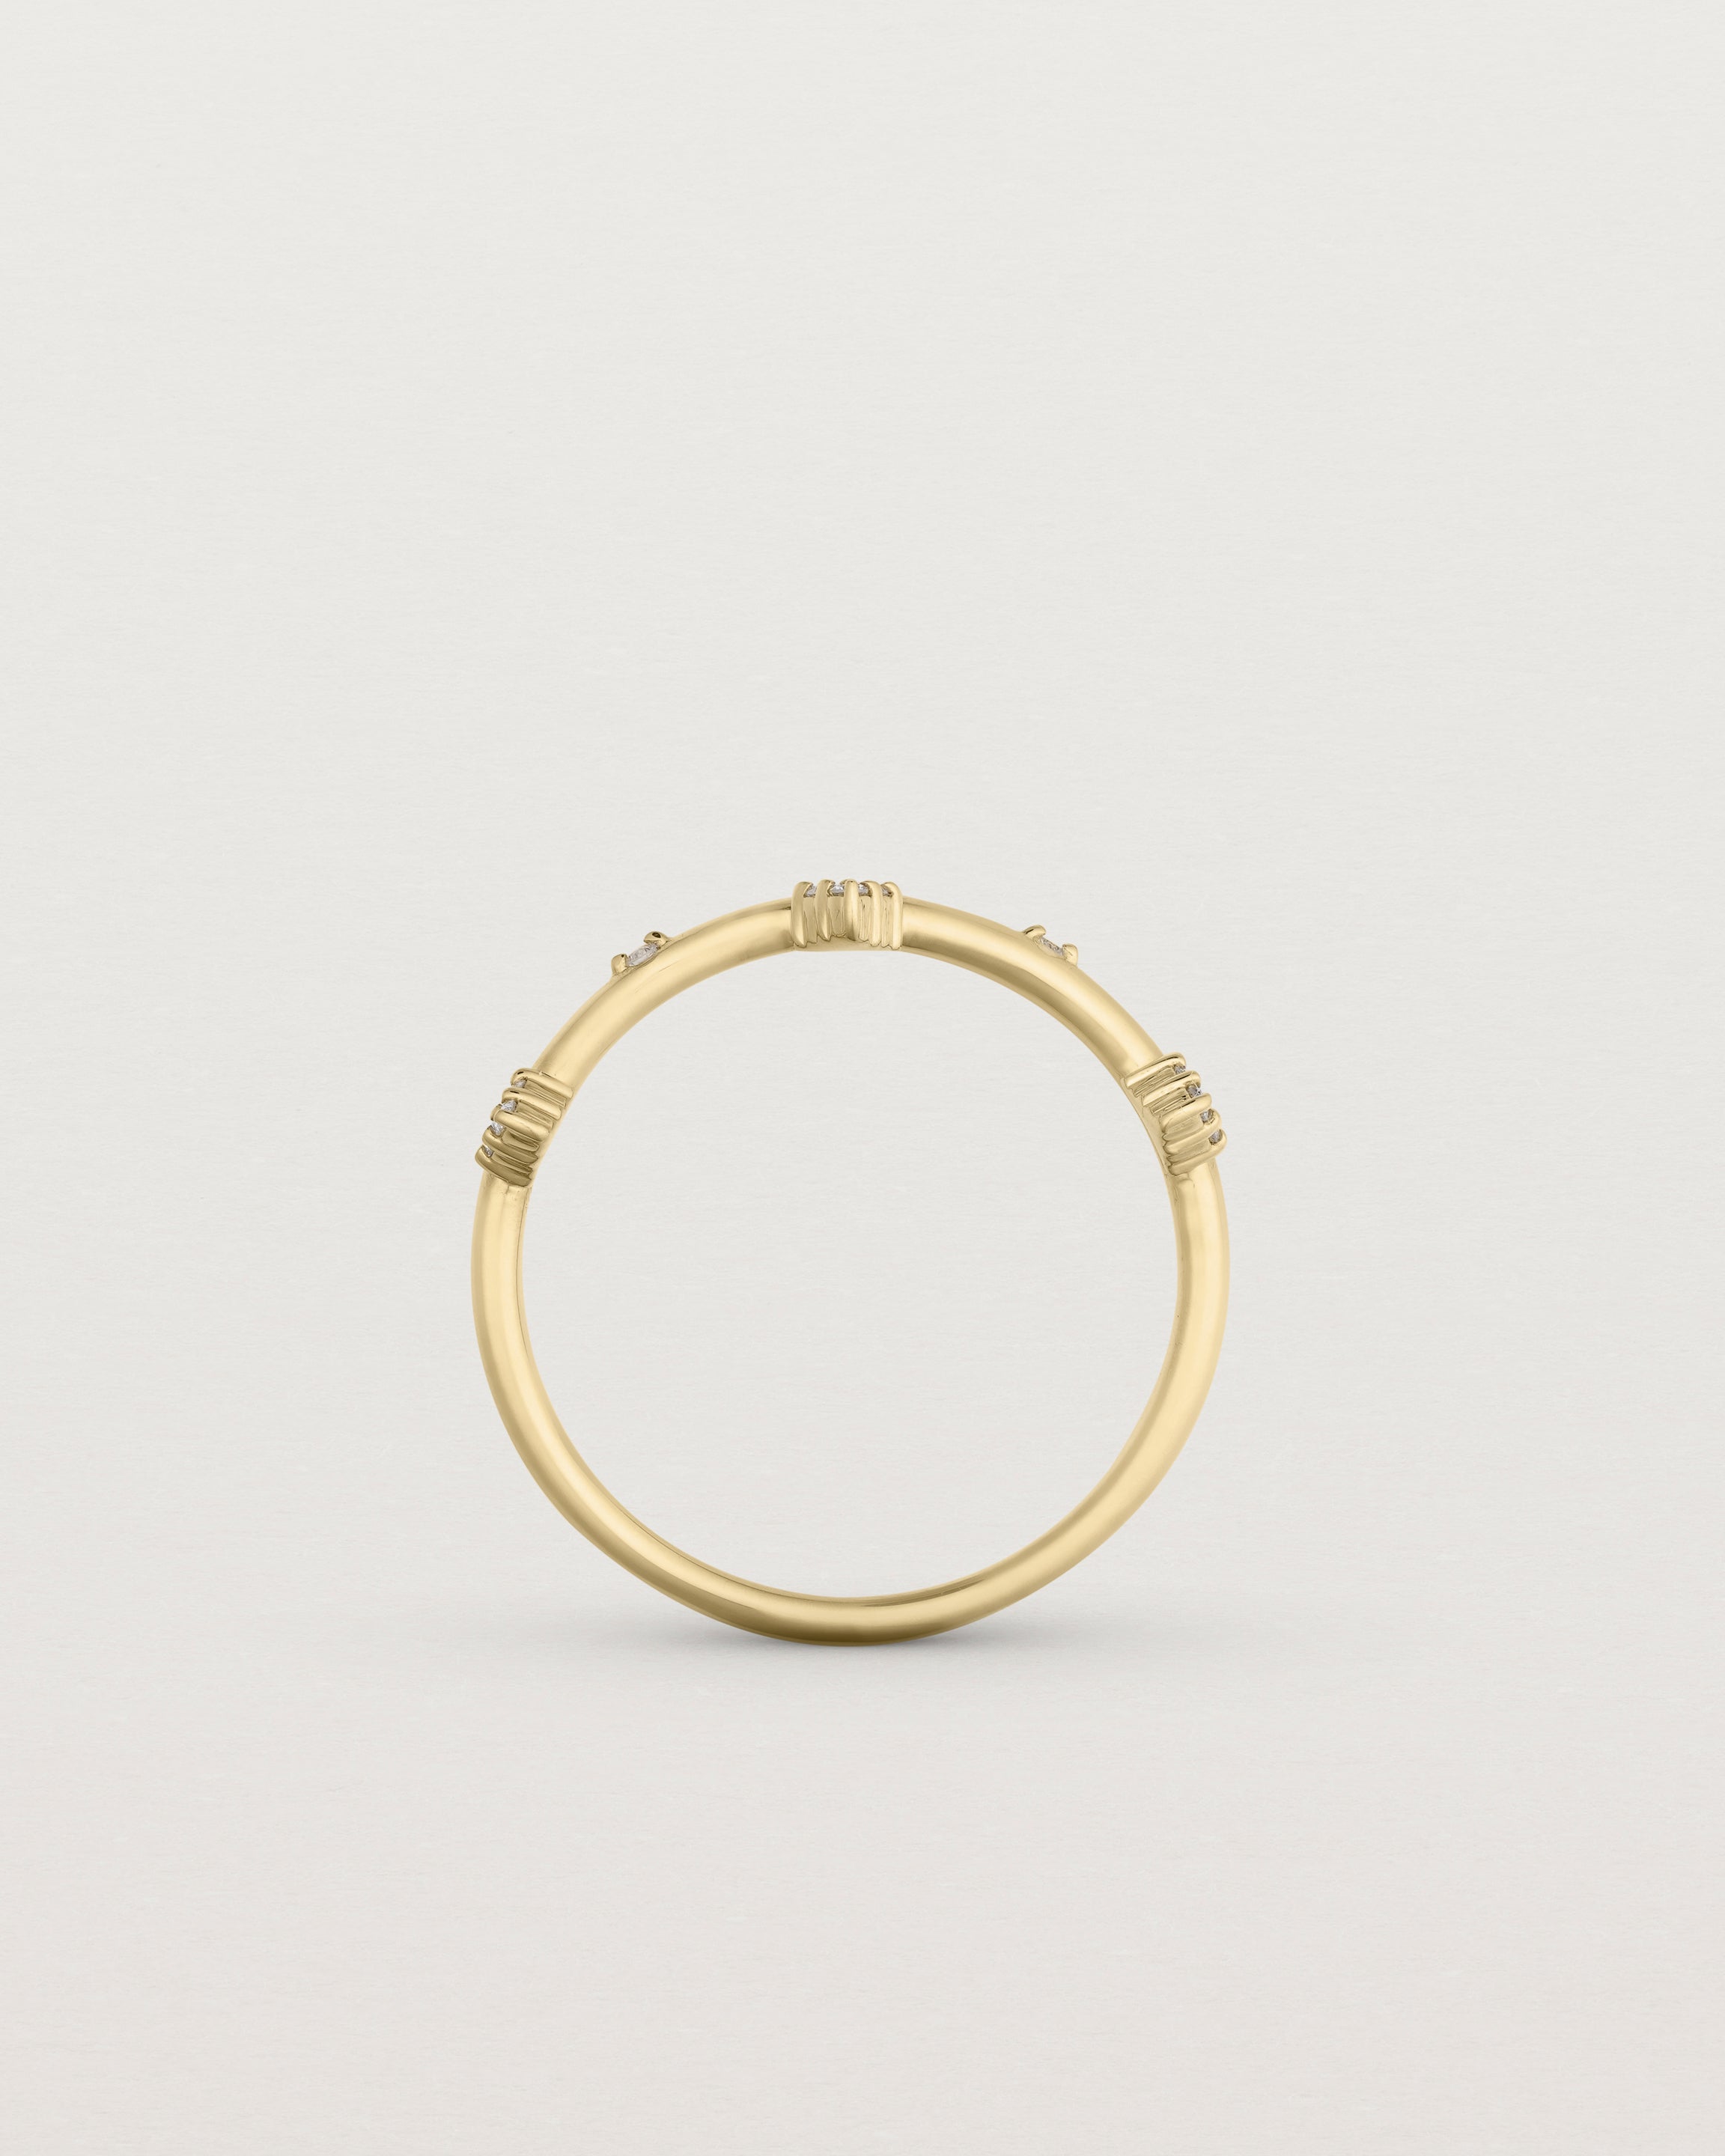 Standing view of the Belle Ring | Diamonds in yellow gold.